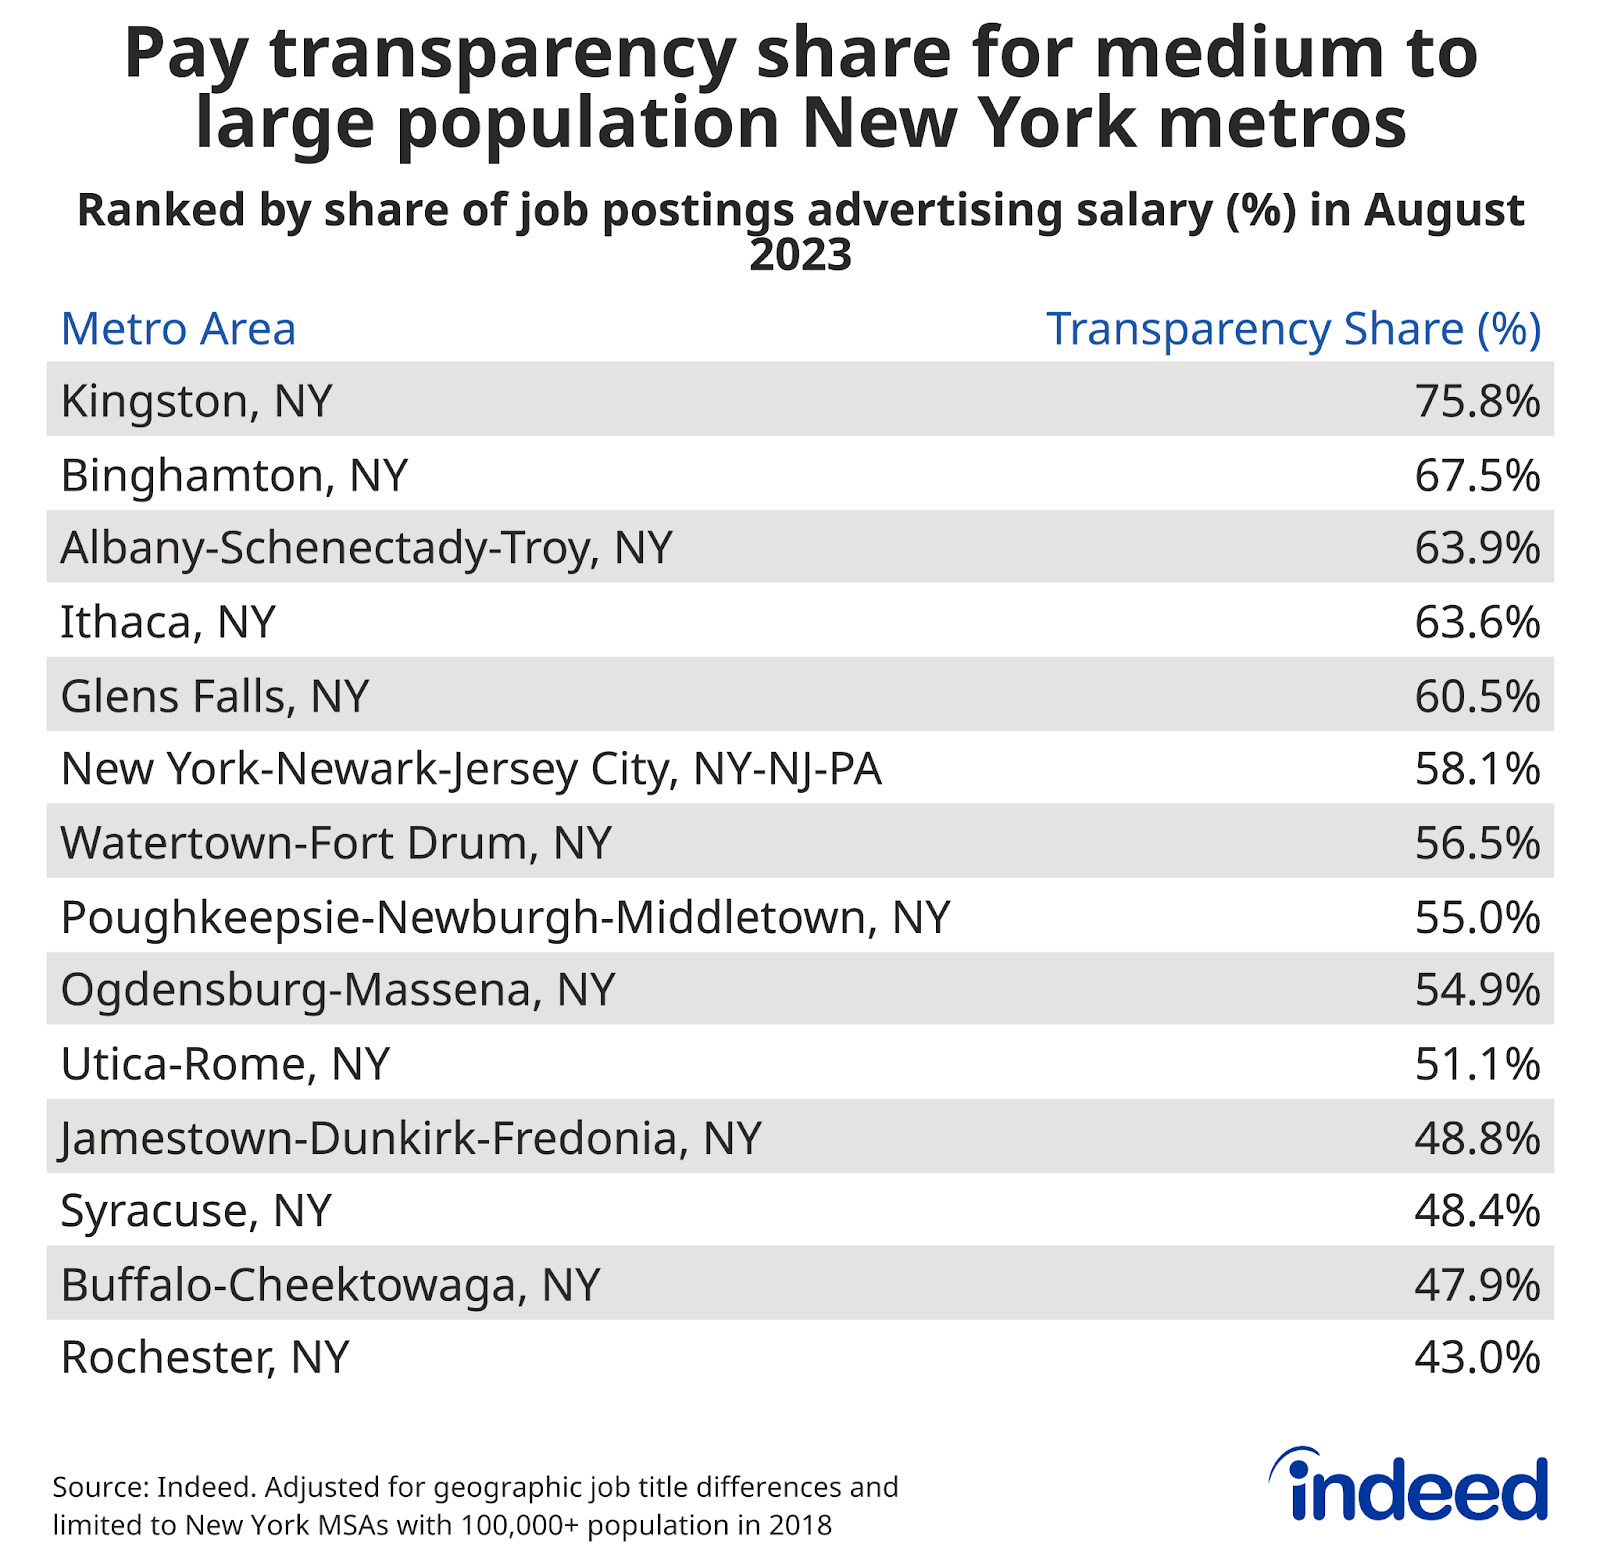 Chart titled “Pay transparency share for medium to large population New York metros” with columns named “Metro Area,” and “Transparency Share (%).” Indeed tracked the percentage share of New York job postings that included employer-provided salaries in August 2023. Kingston, New York topped the list with the highest transparency share of 75.8% while Rochester, New York trailed the list at 43%. 